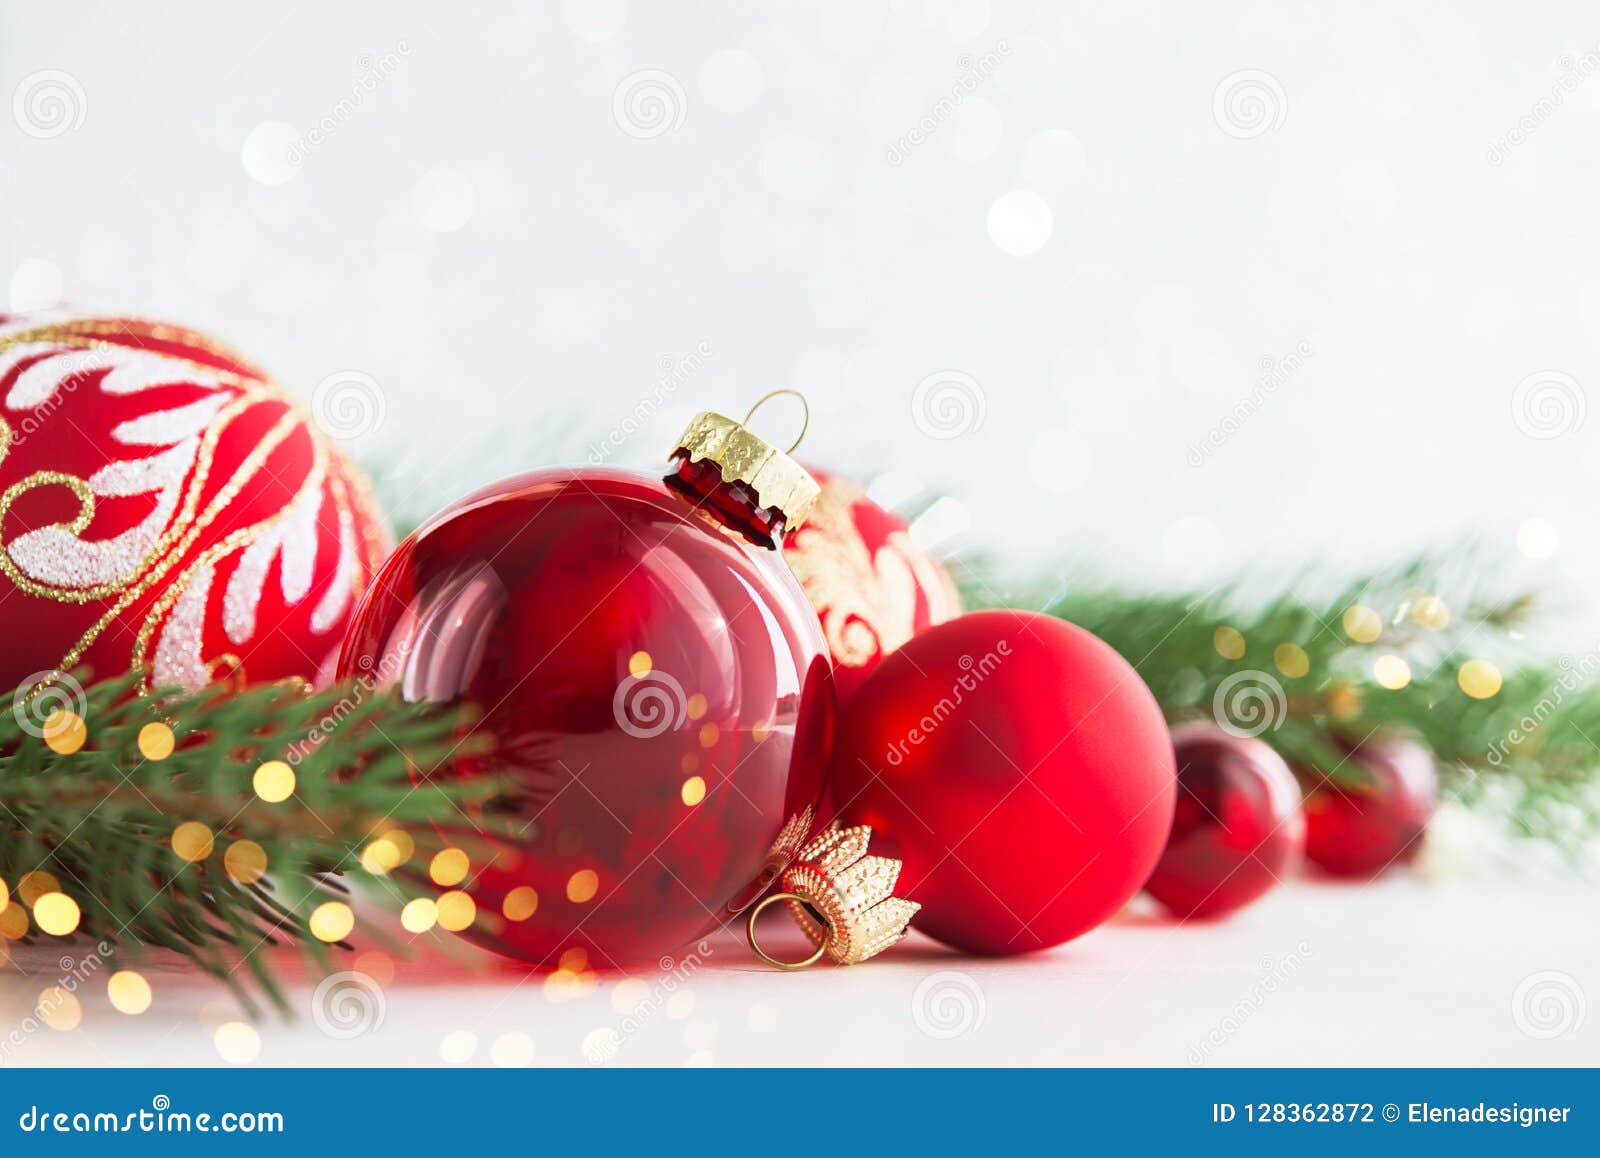 christmas and new year holiday background. xmas greeting card. winter holidays.